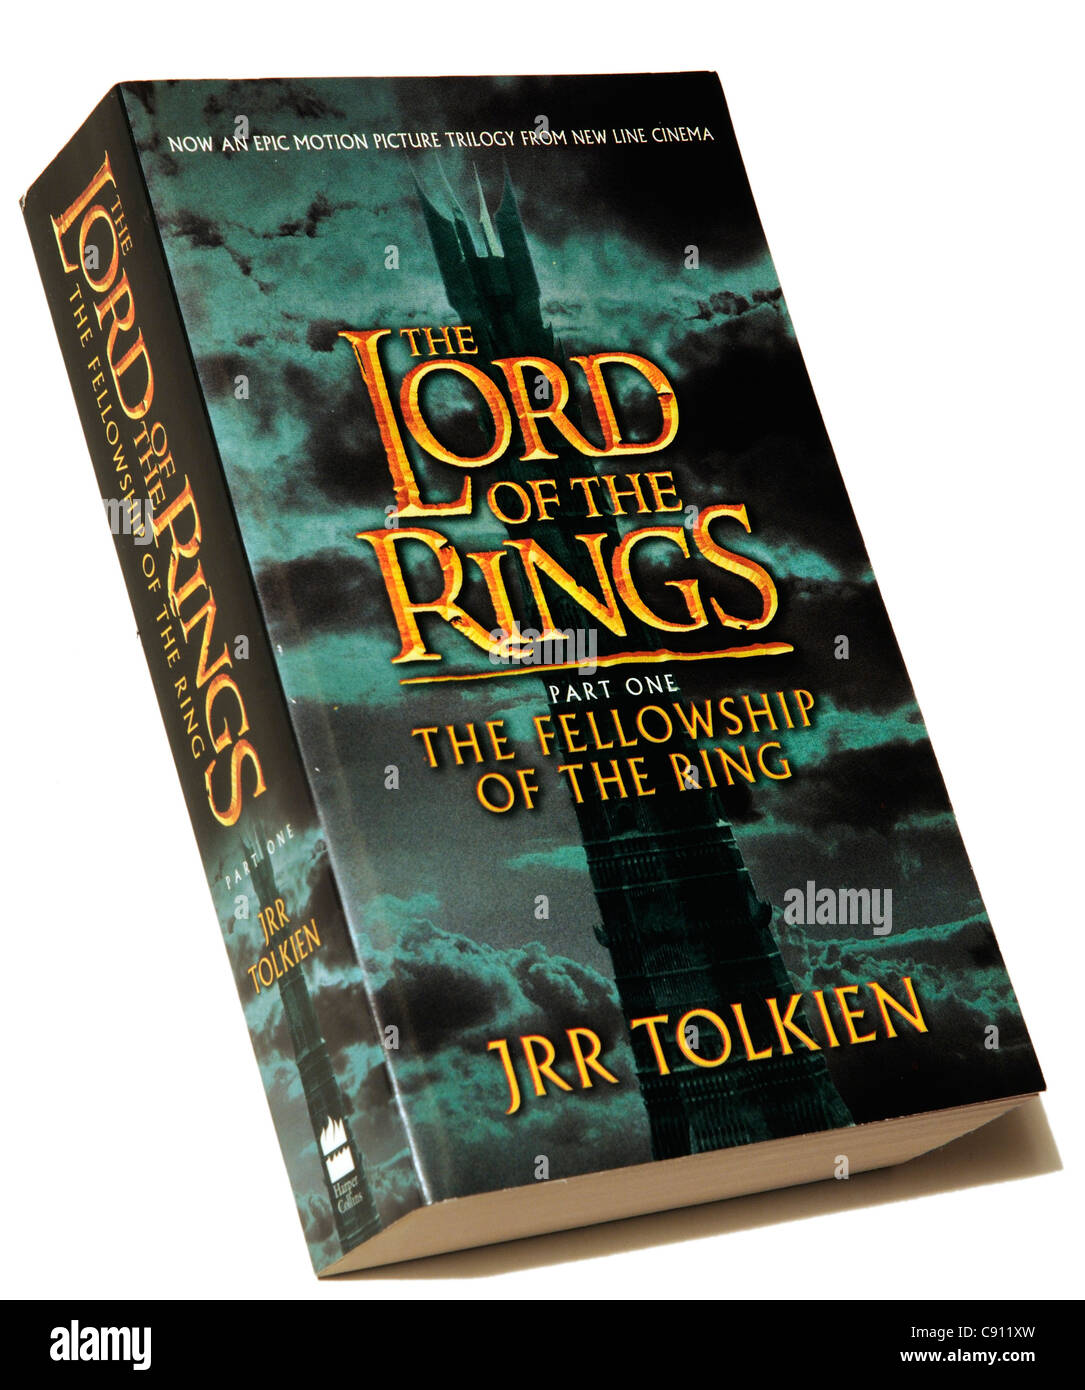 The Lord of the Rings by JRR Tolkein Stock Photo